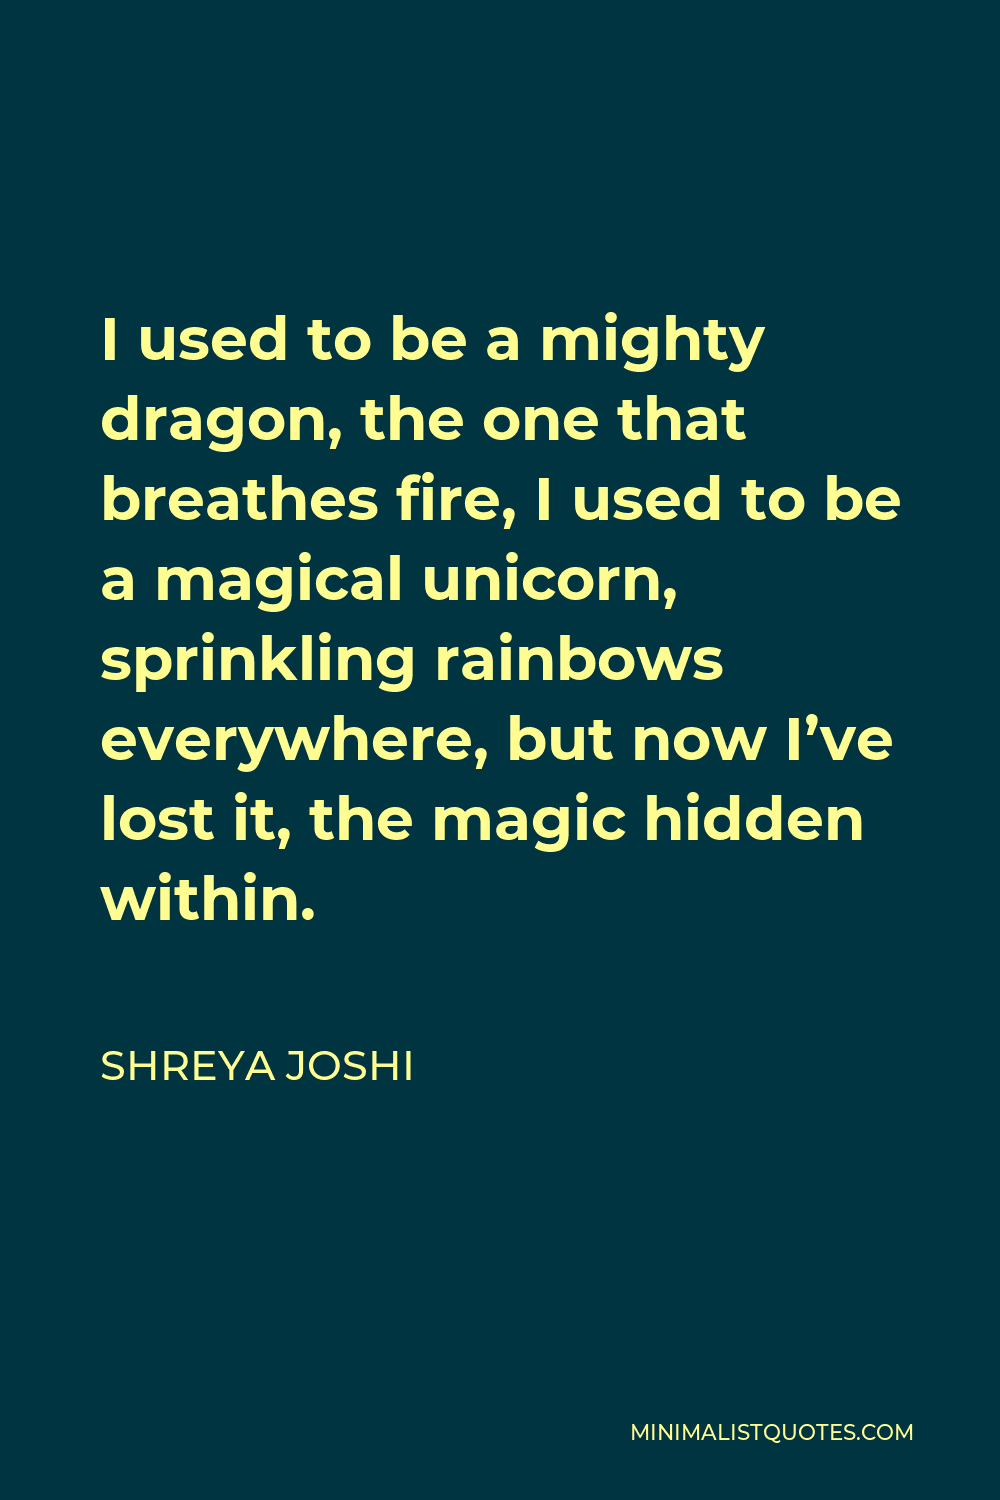 Shreya Joshi Quote - I used to be a mighty dragon, the one that breathes fire, I used to be a magical unicorn, sprinkling rainbows everywhere, but now I’ve lost it, the magic hidden within.